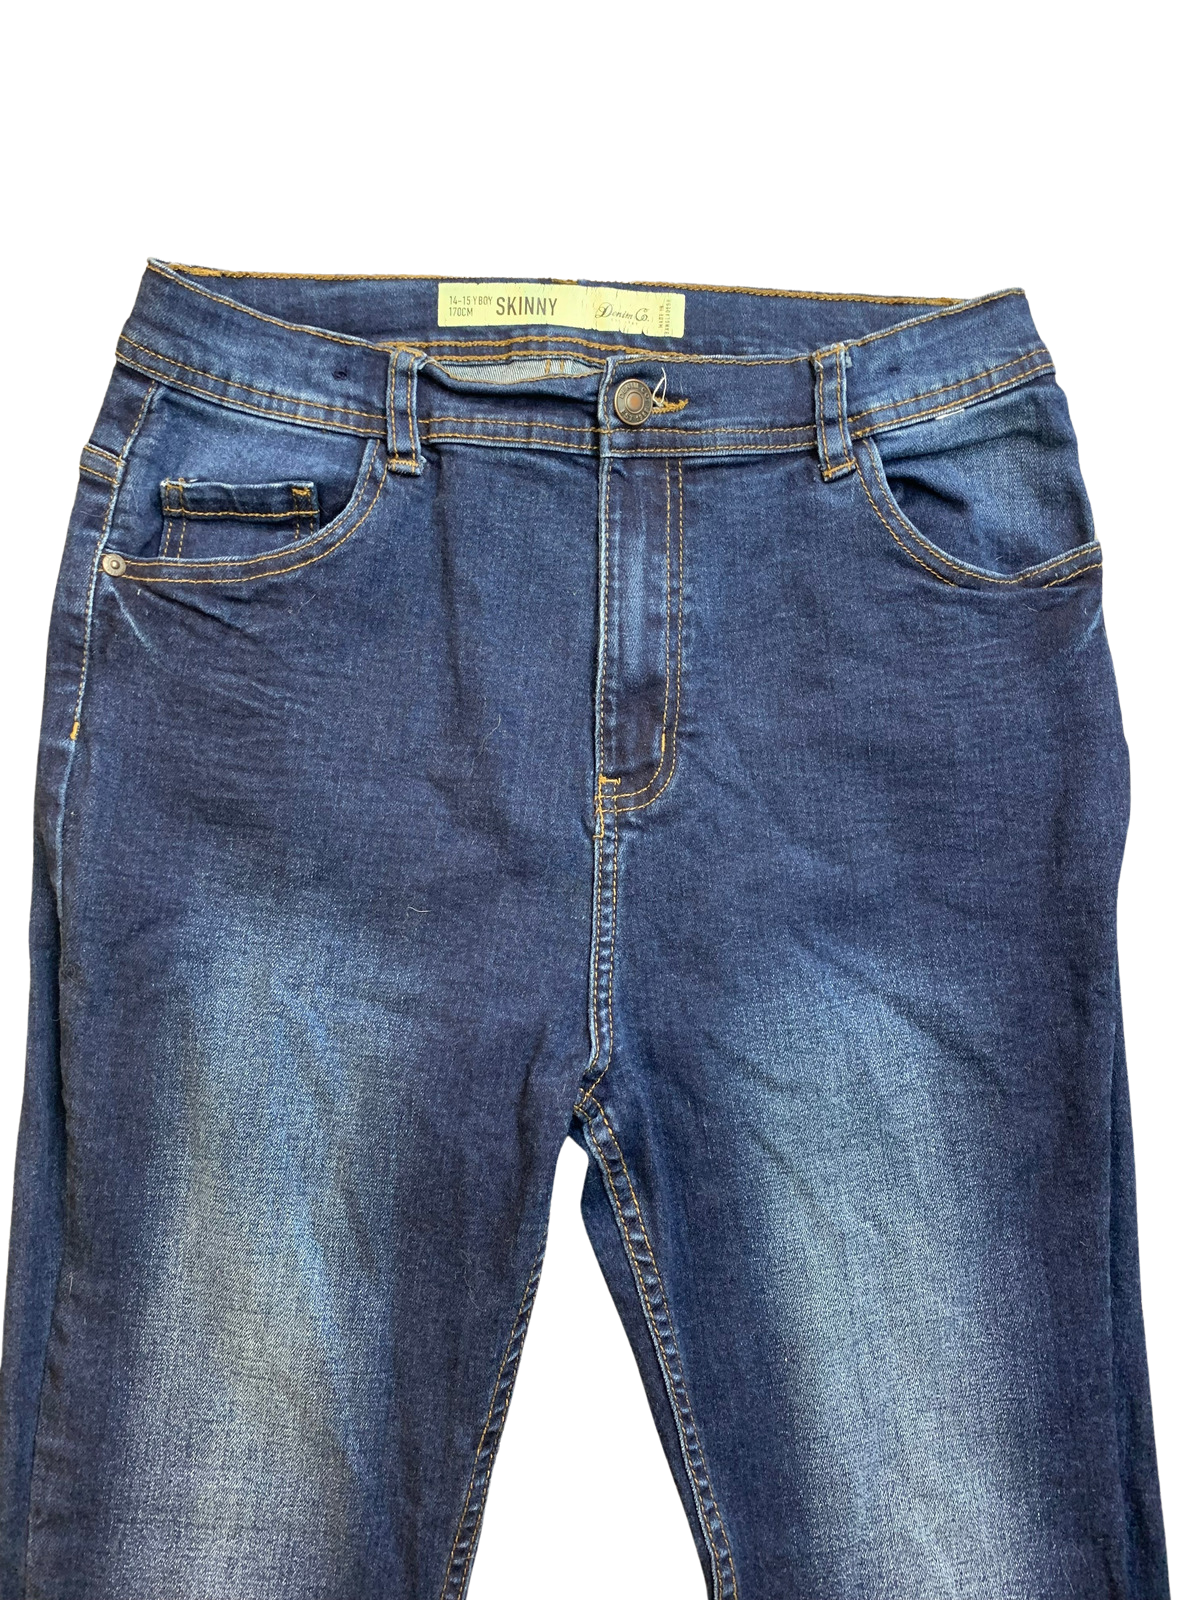 Denim Co Skinny Fit Jeans 14-15 Years